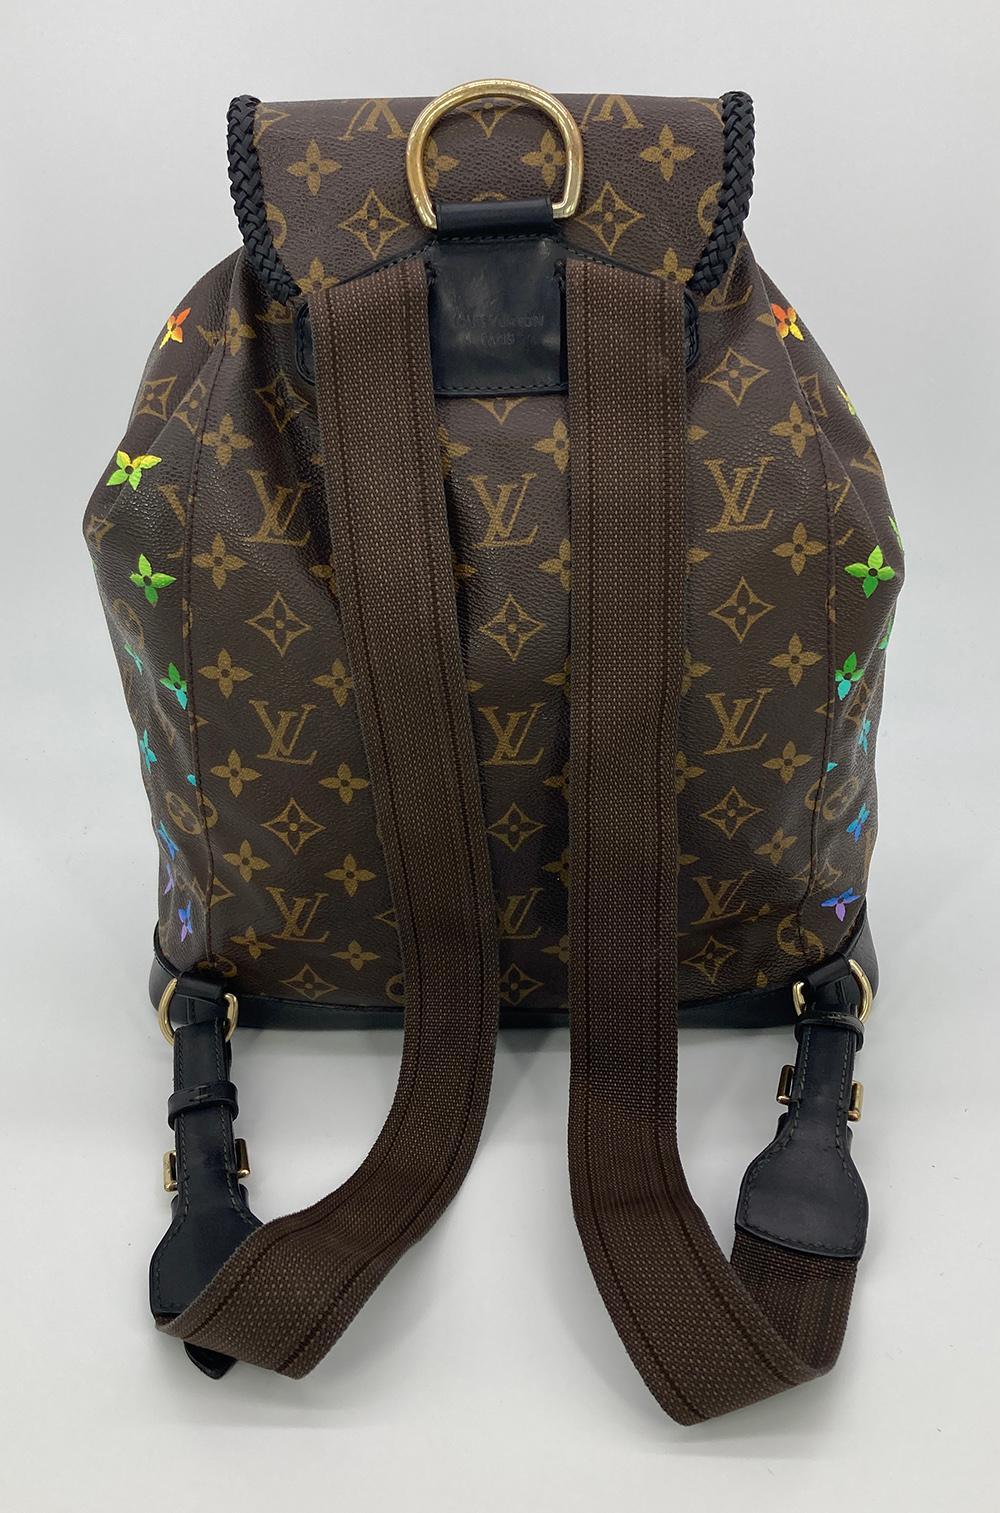 OOAK Louis Vuitton Hand Painted Leather Wrapped Montsouris GM Backpack in very good condition. Signature monogram canvas exterior trimmed with black leather and one of a kind hand painted rainbow monogram throughout. double back nylon and leather